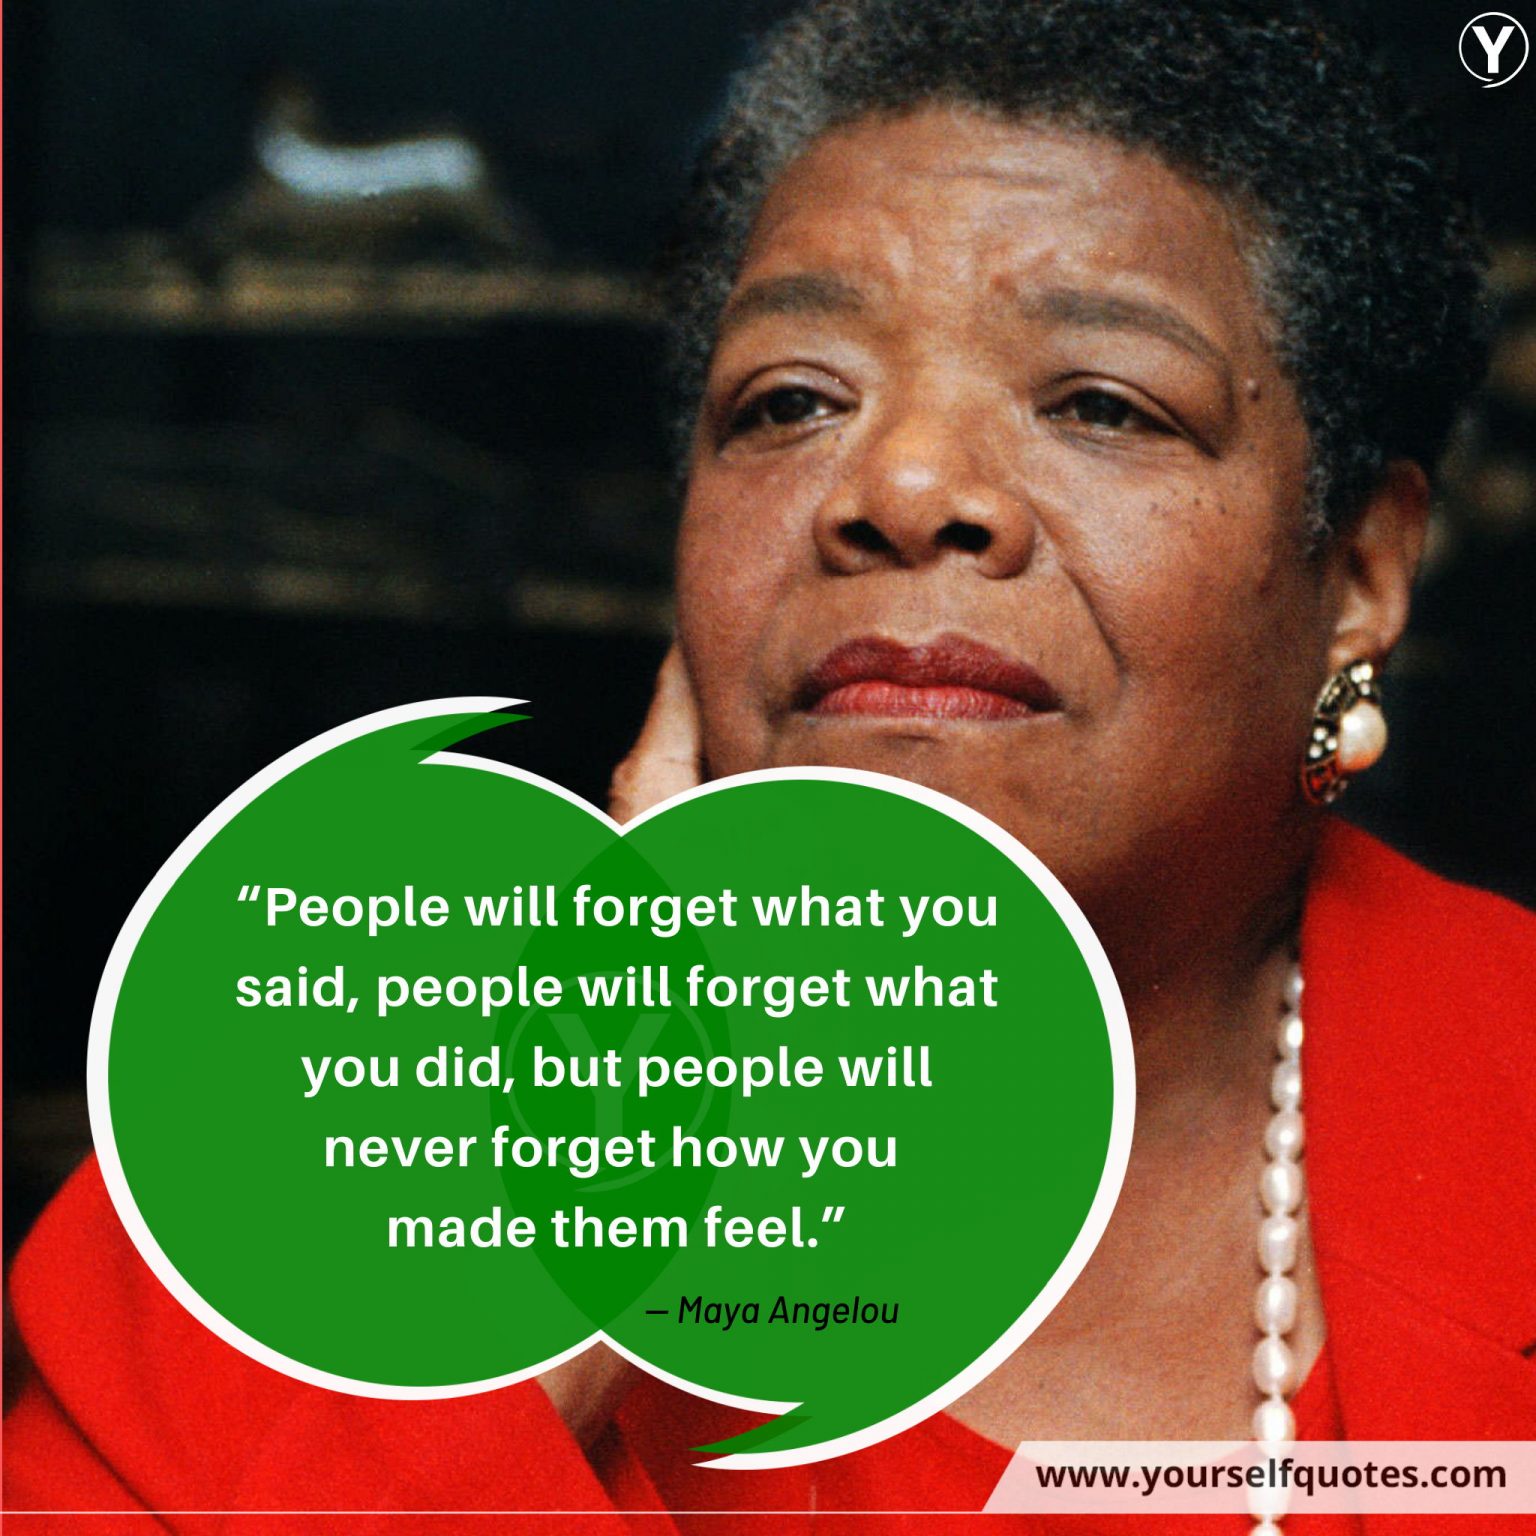 famous quotes by maya angelou